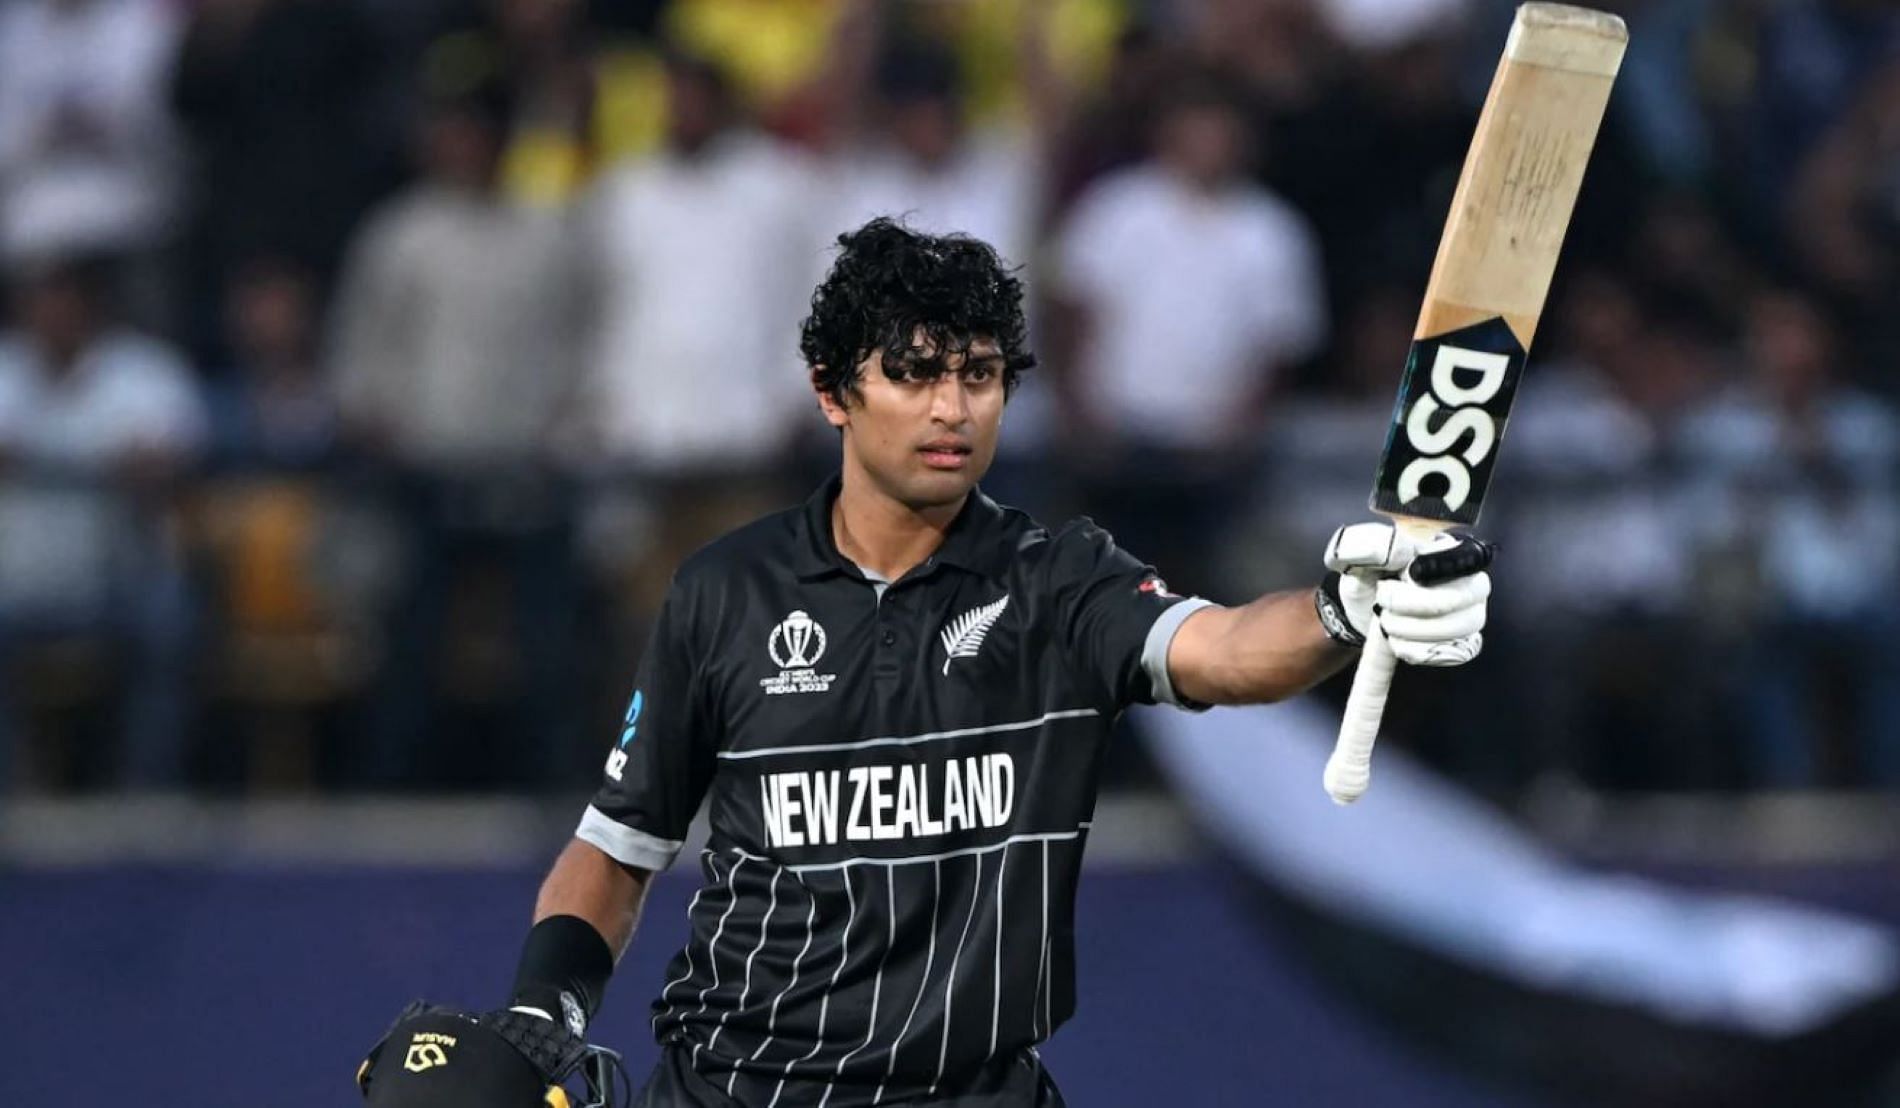 Ravindra scored an incredible second century of the 2023 World Cup